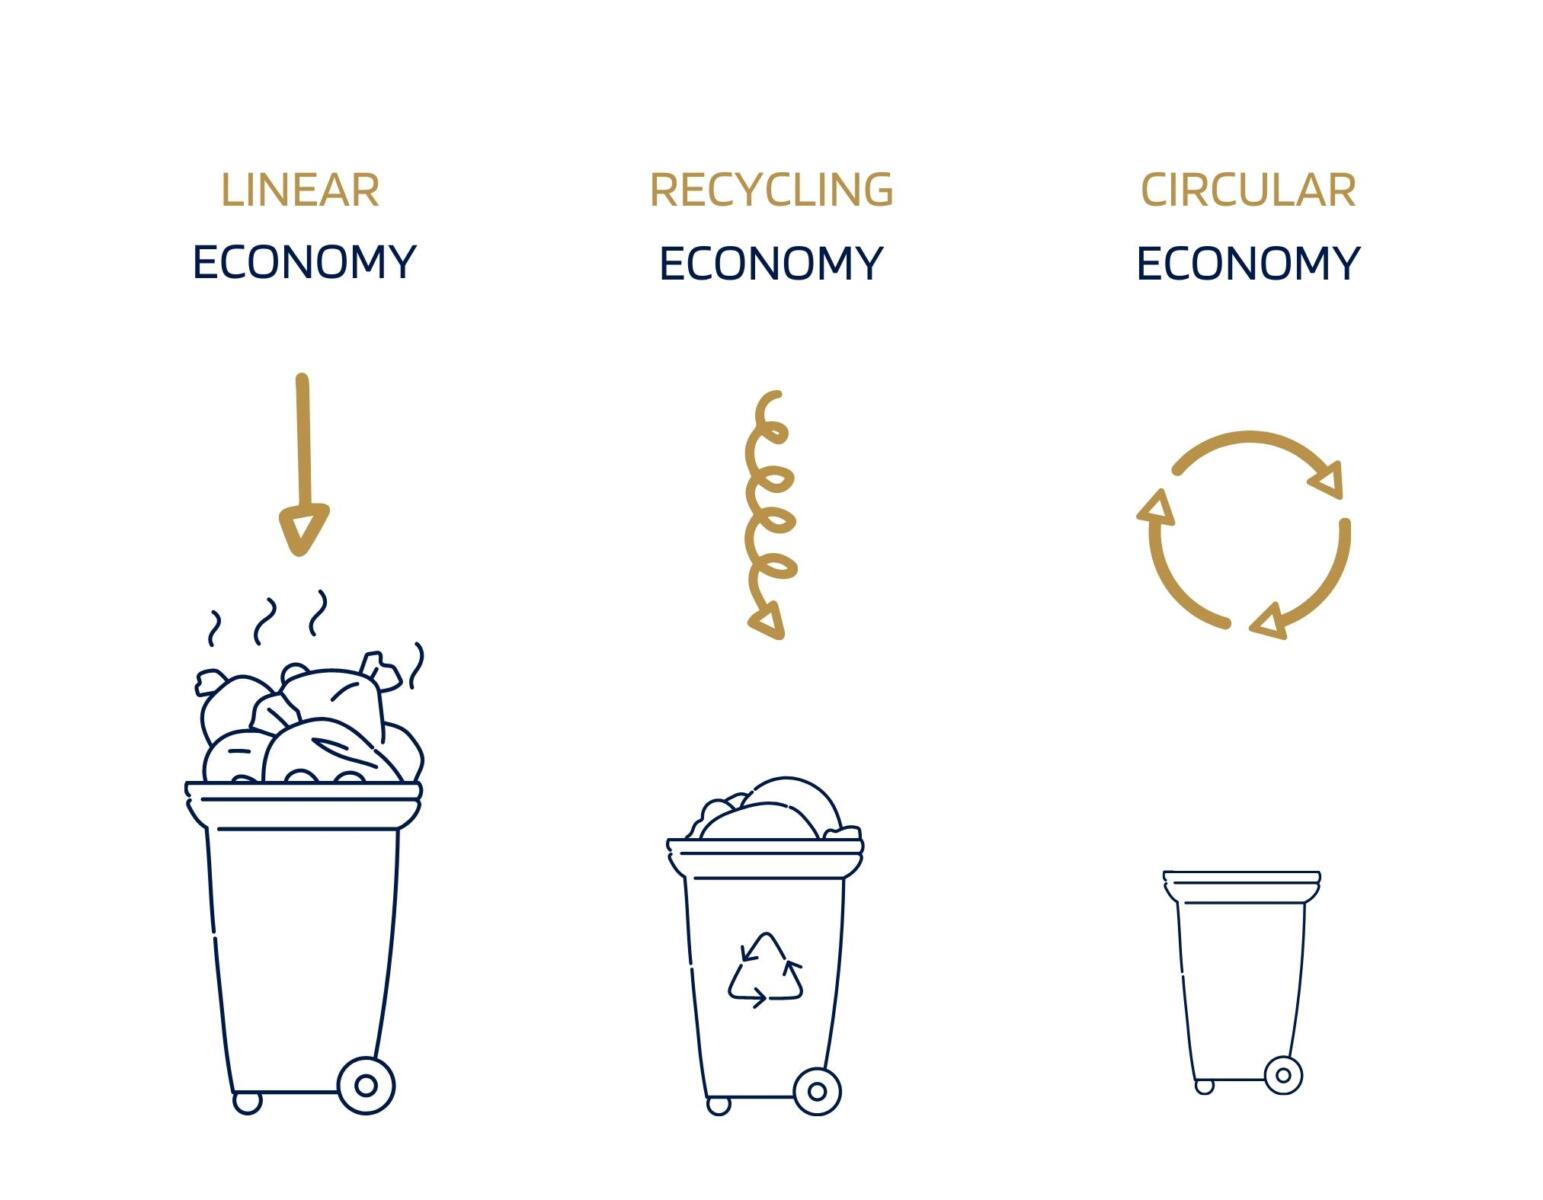 Image of three refuse bins depicting three economy types: The full bin is the linear economy, the recycling bin is the recycling economy and the small bin depicts the circular economy. 